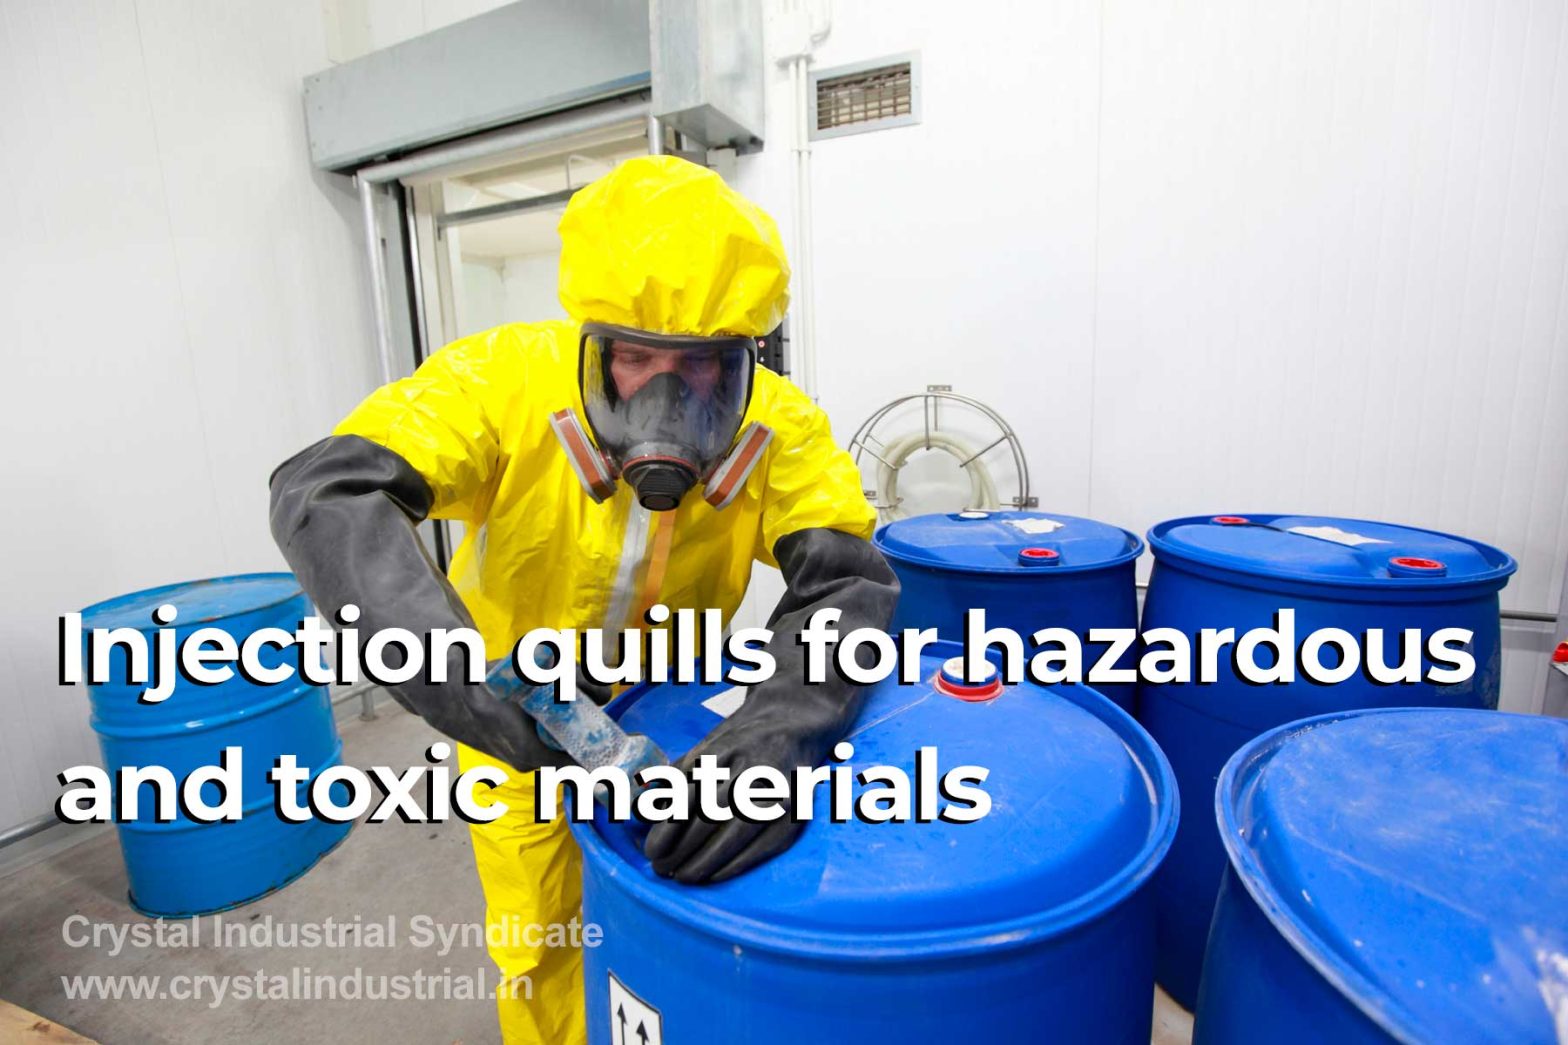 Future advancements in the field of injection quills for hazardous and toxic materials